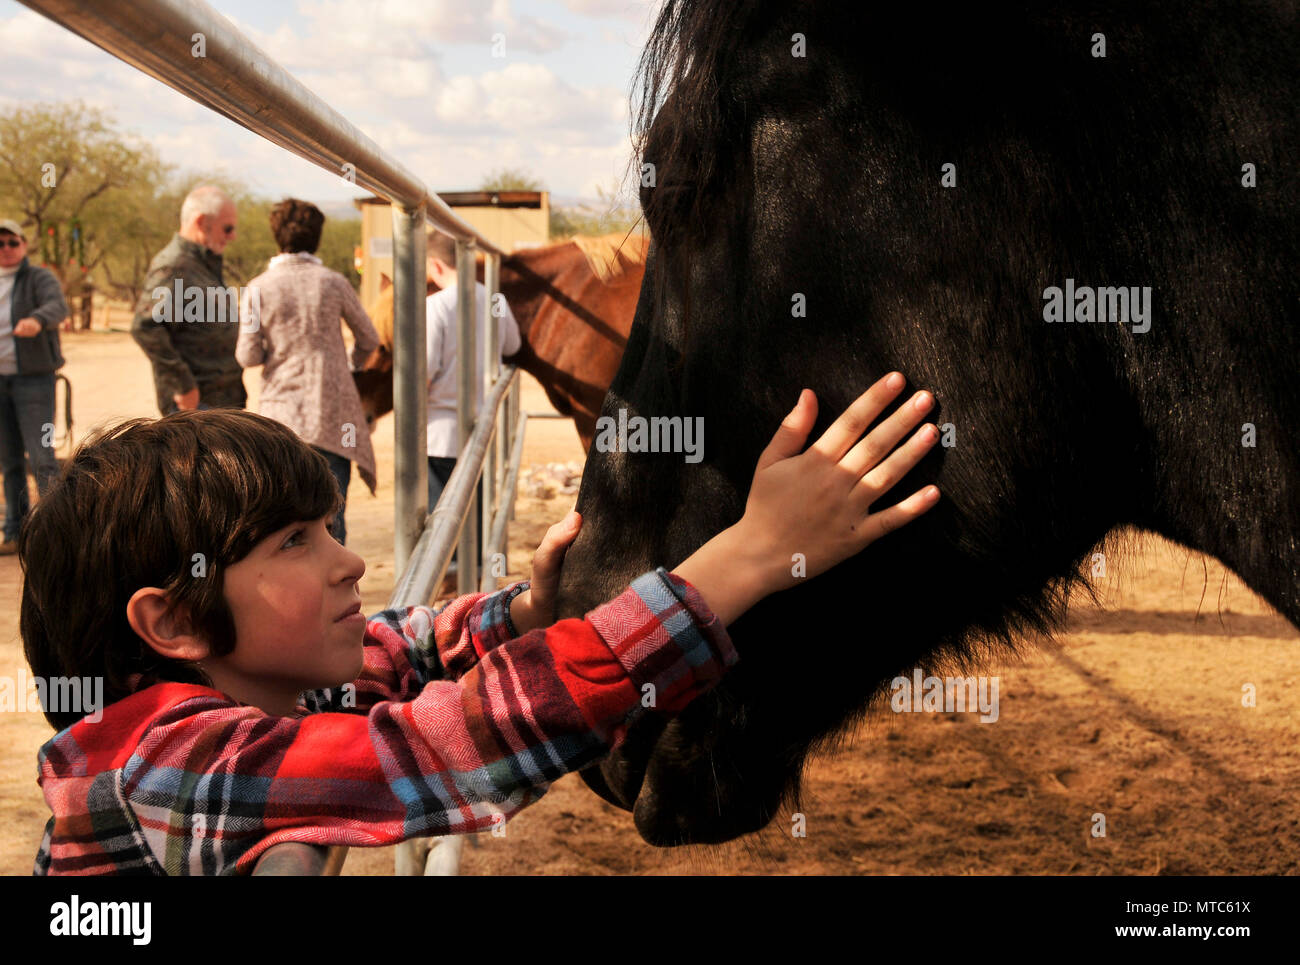 A young boy selects a horse to sponsor as a Christmas gift from his aunt at Equine Voices Sanctary and Rescue, Green Valley, Arizona, USA. Stock Photo